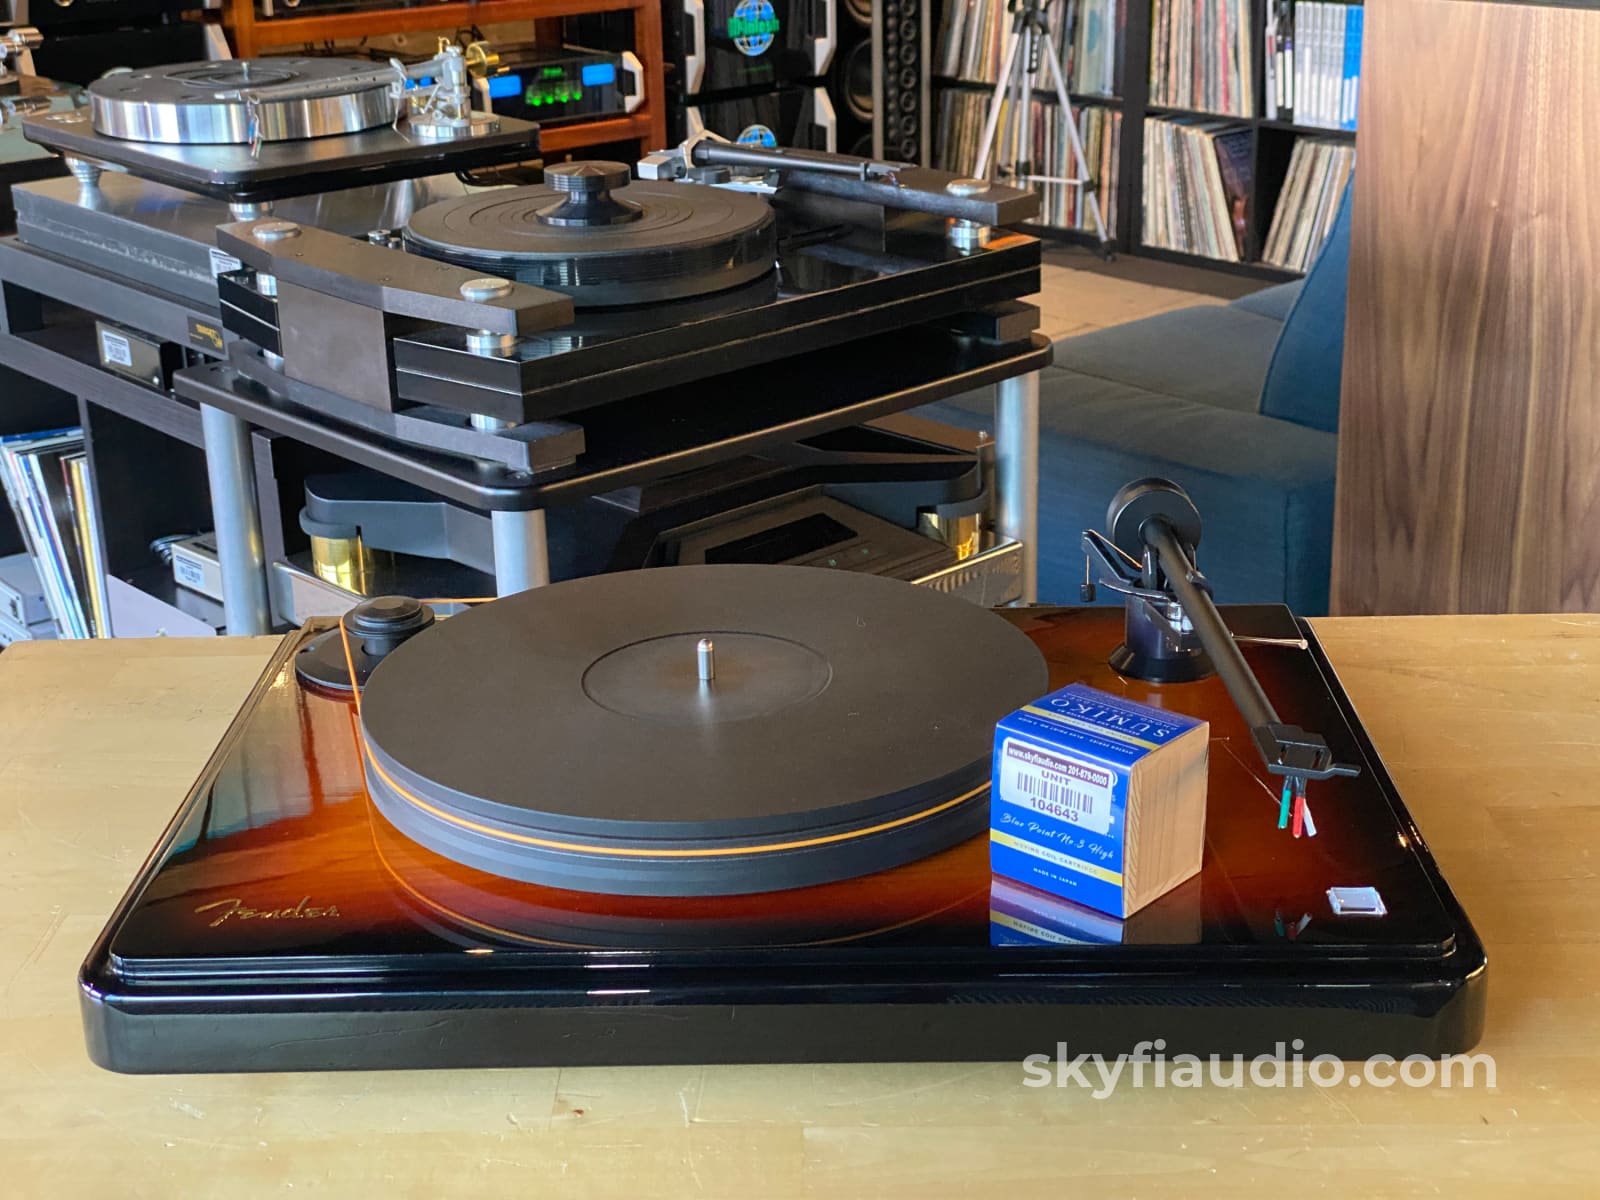 Mofi Electronics X Fender Precisiondeck Turntable With New Sumiko Cartridge